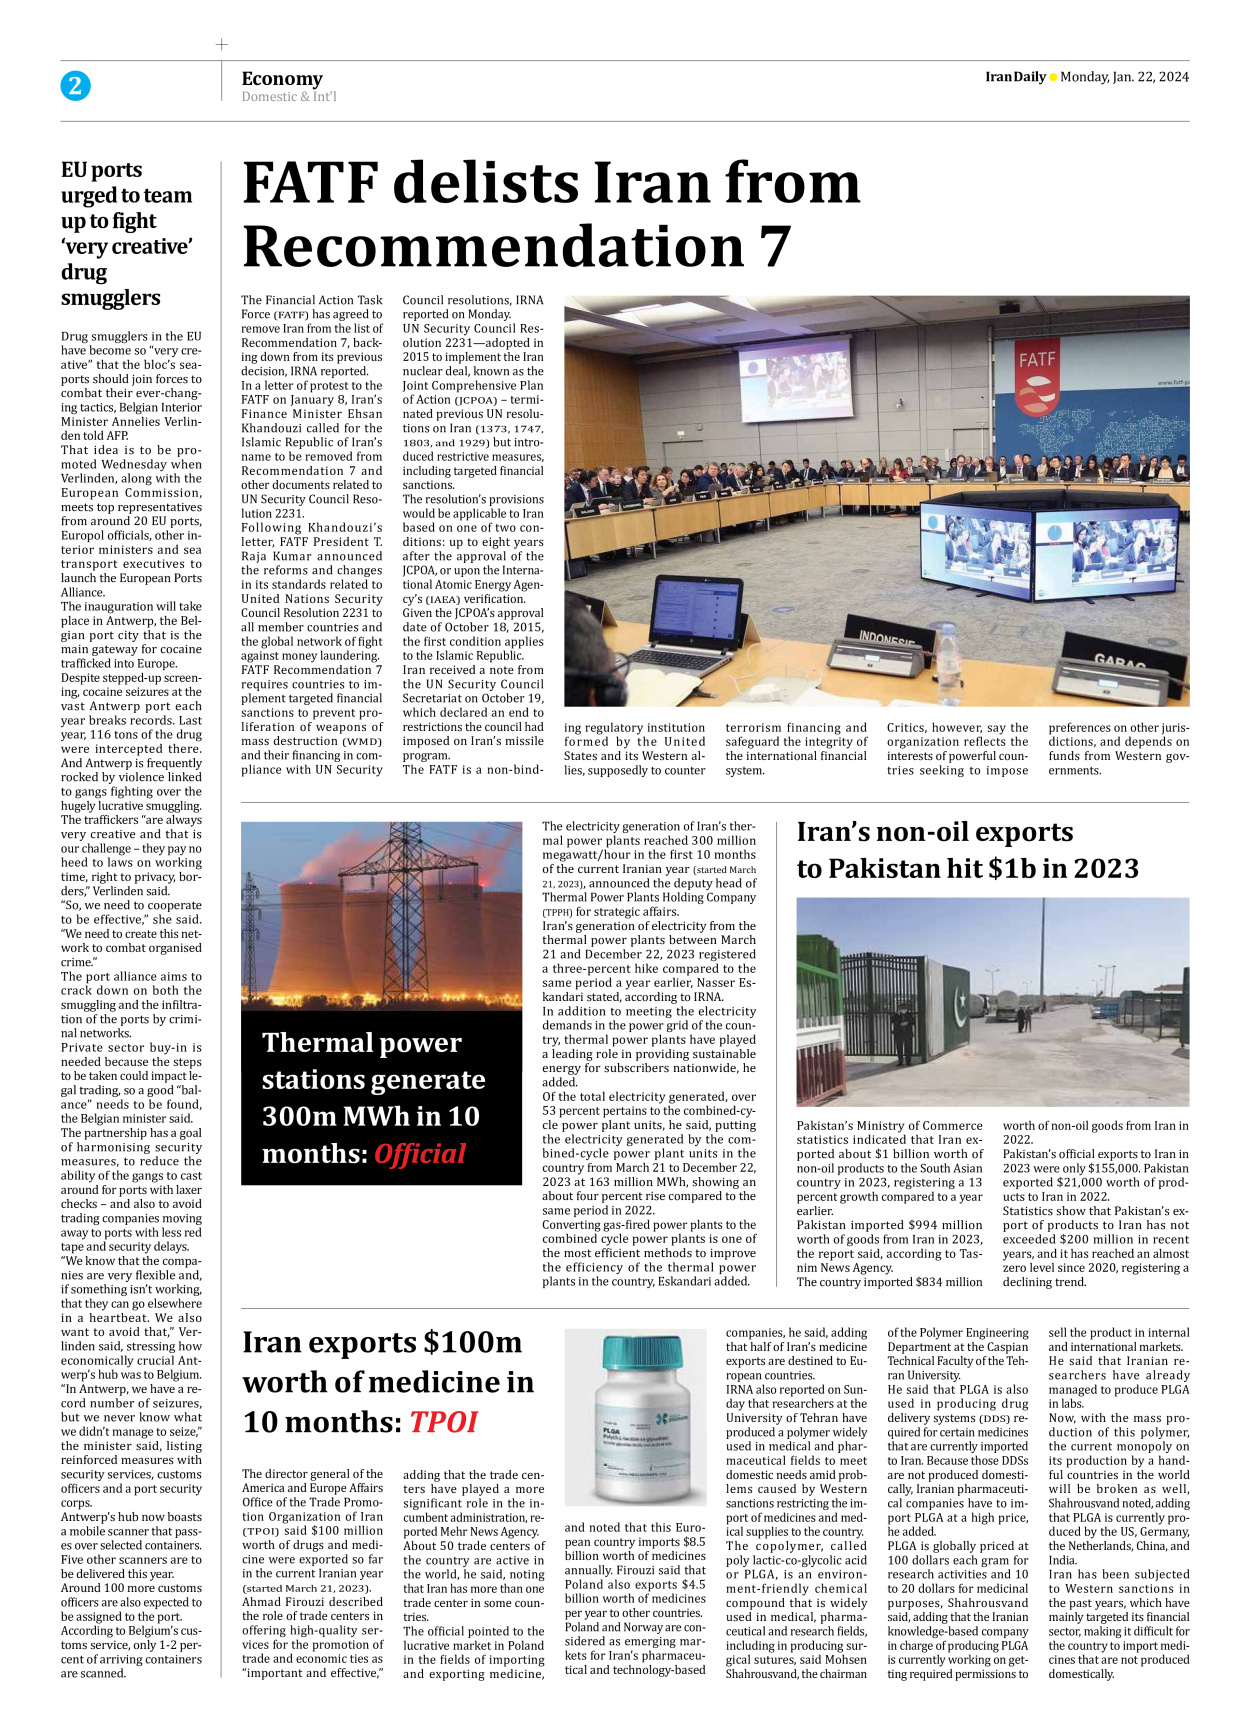 Iran Daily - Number Seven Thousand Four Hundred and Ninety One - 22 January 2024 - Page 2